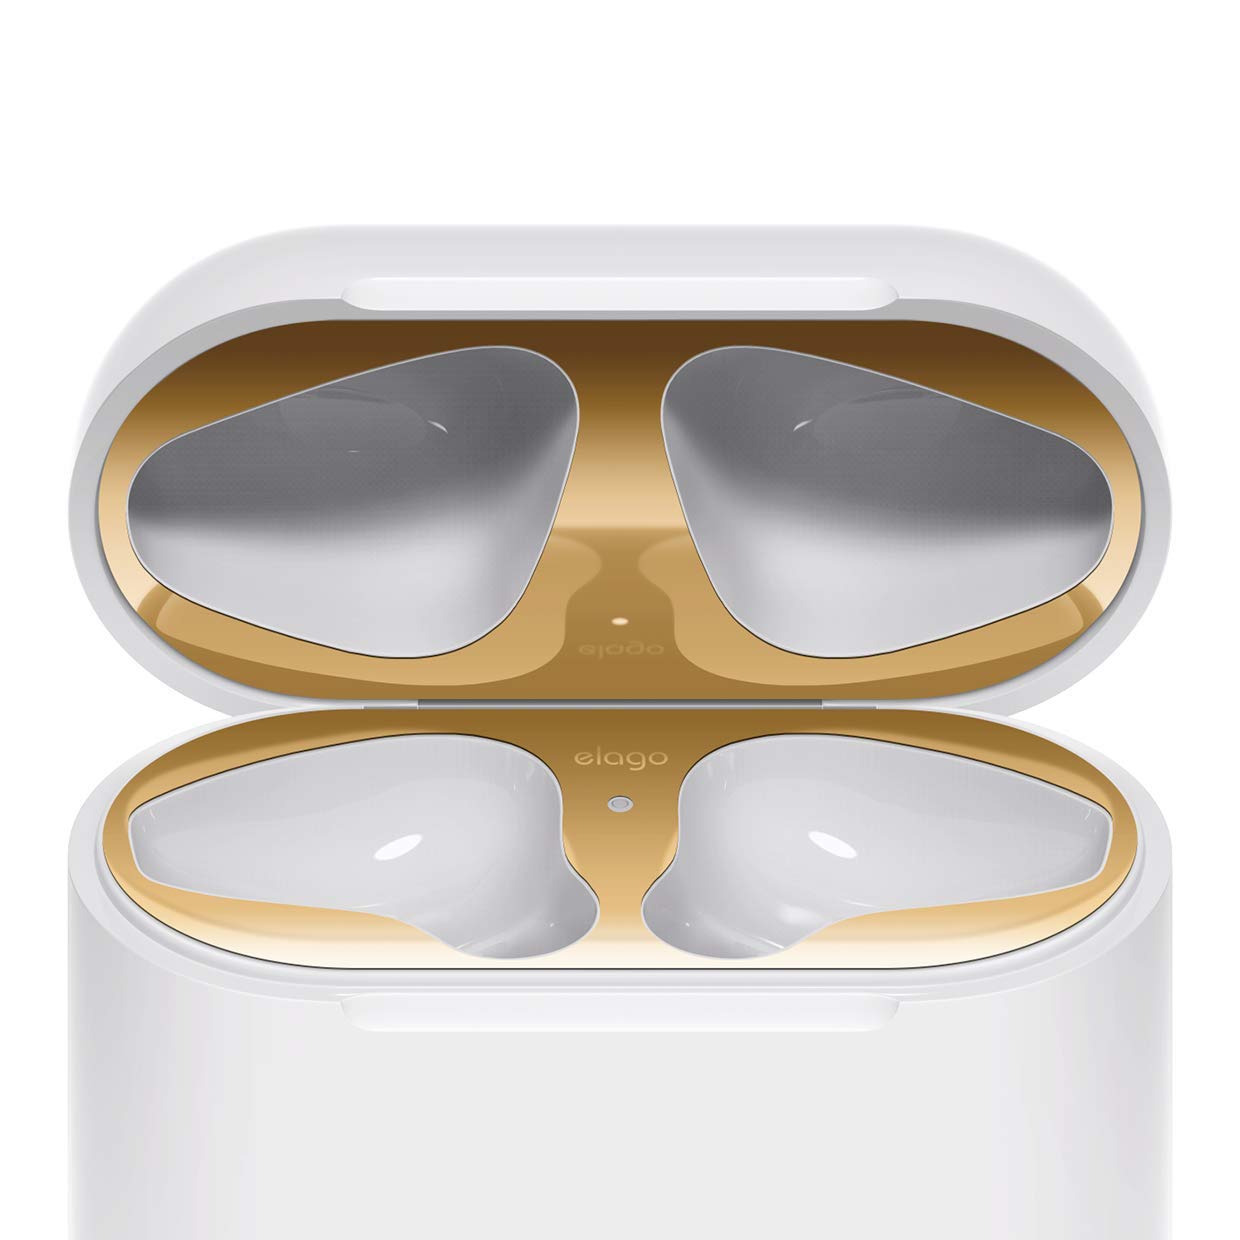 Book Cover elago Upgraded AirPods Dust Guard (Gold, 1 Set) – Dust-Proof Film, Luxurious Looking, Must Watch Easy Installation Video, Chromium Plating, Protect AirPods from Metal Shavings [US Patent Registered]